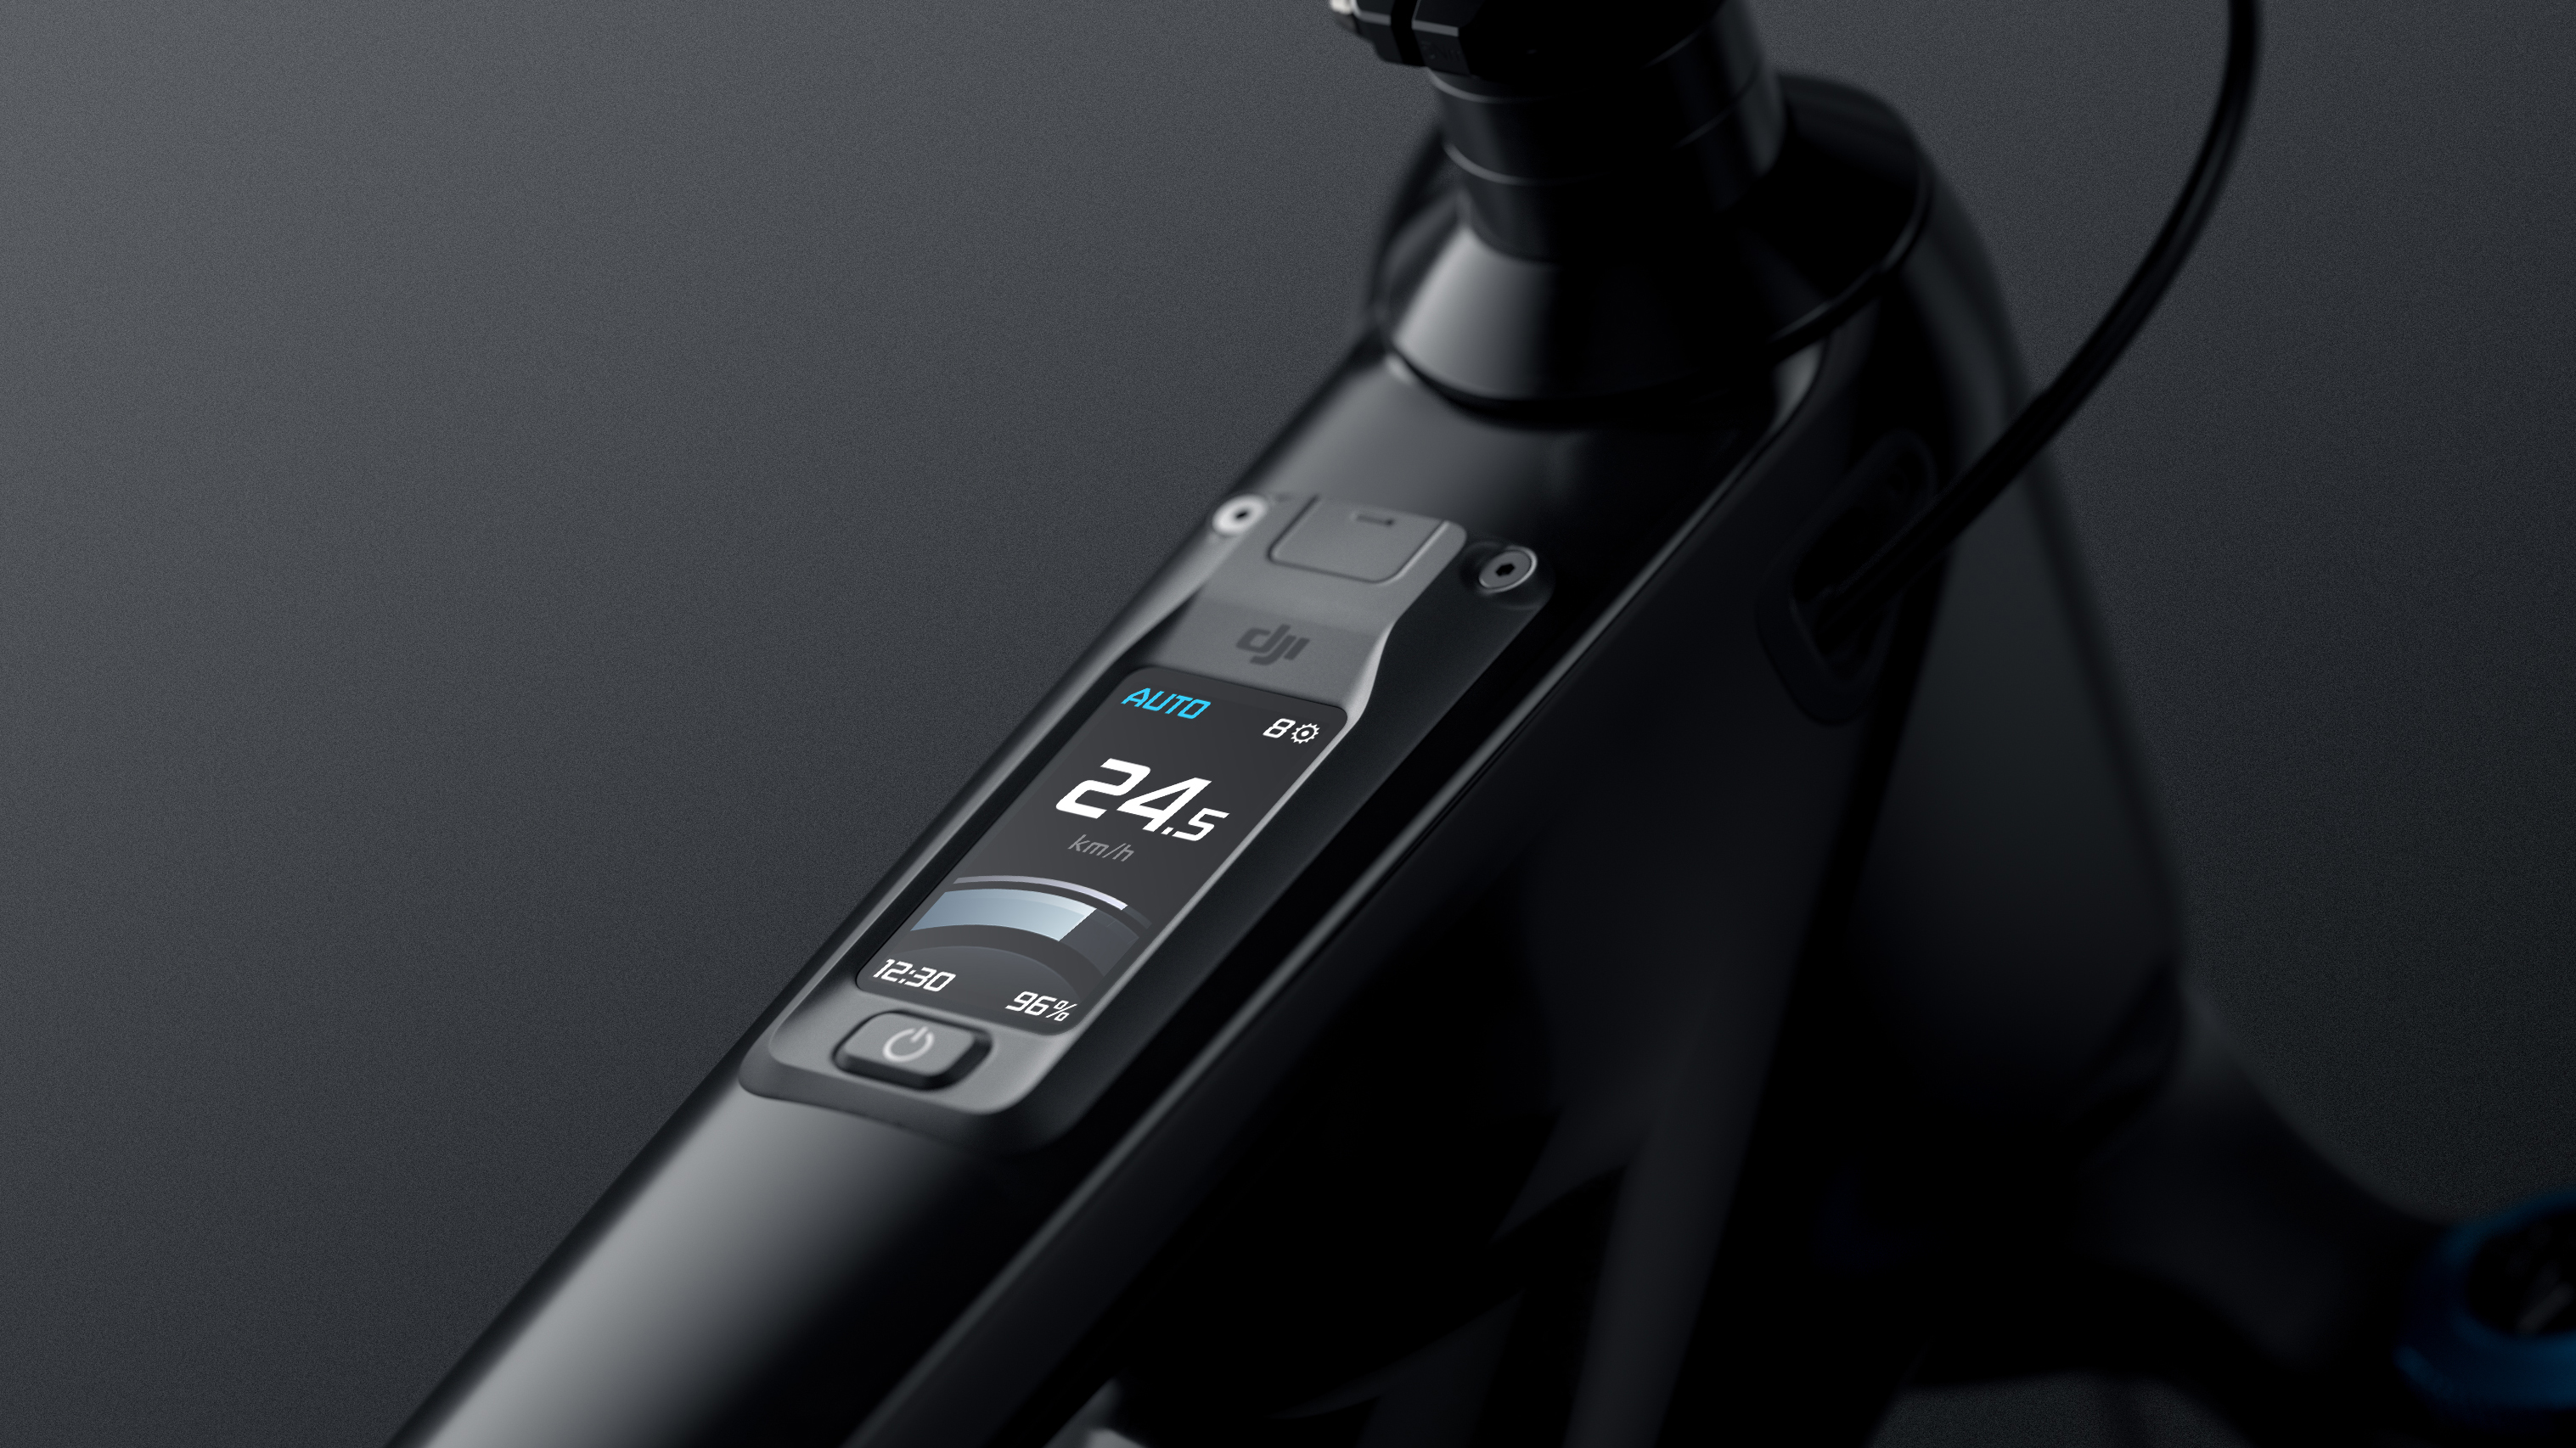 A phone connected to the DJI Amivox e-bike system